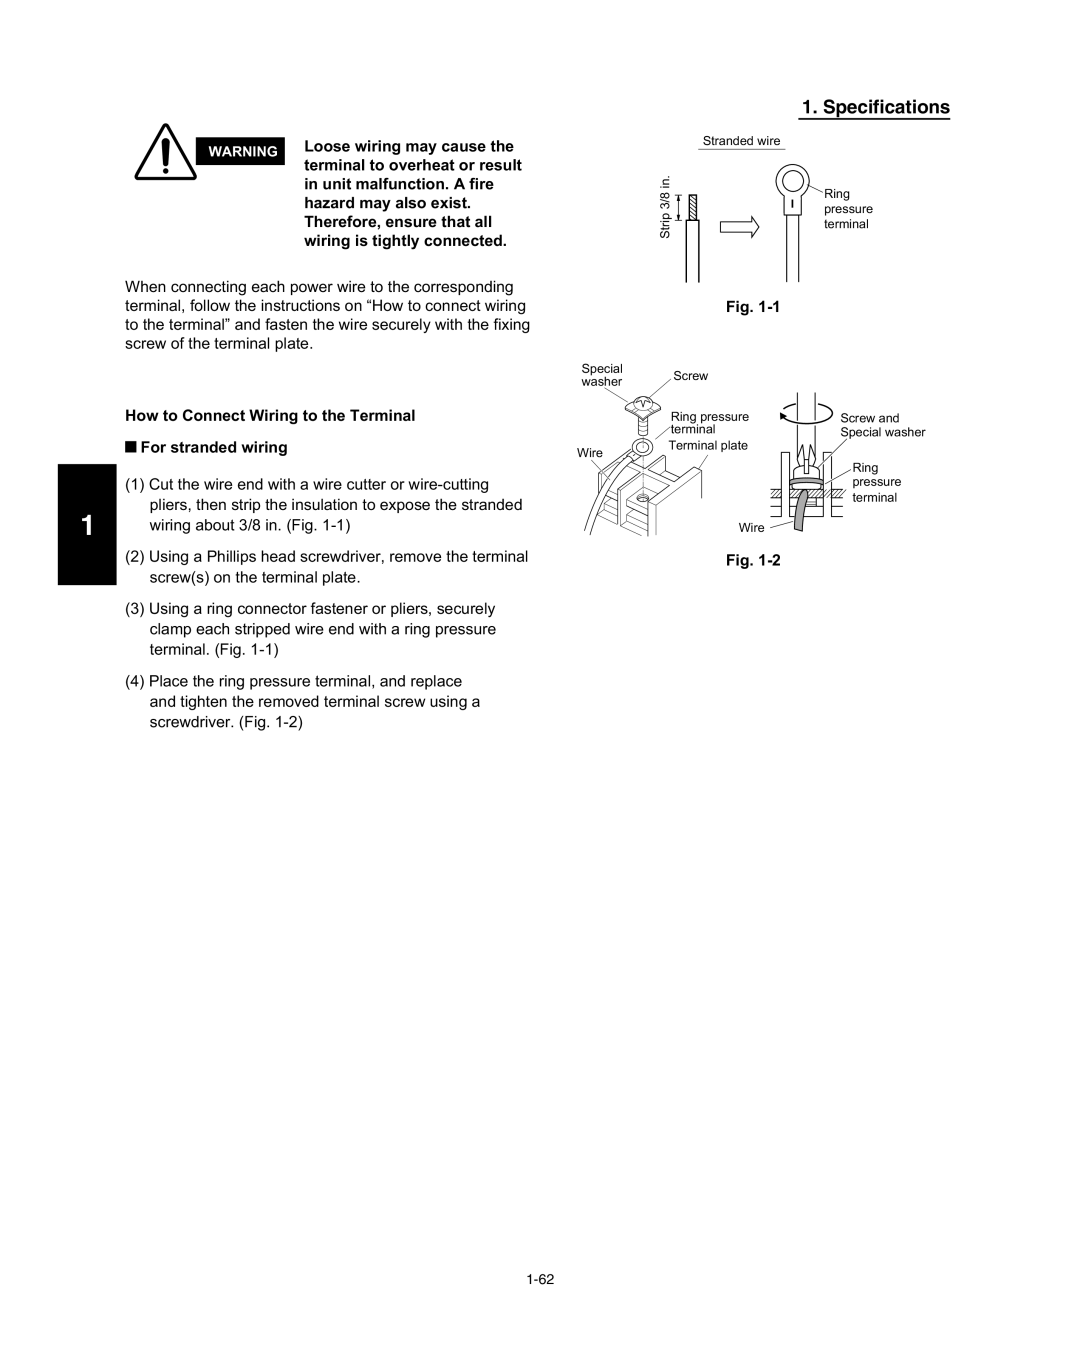 Panasonic R410A service manual Specifications, How to Connect Wiring to the Terminal, For stranded wiring, Fig 